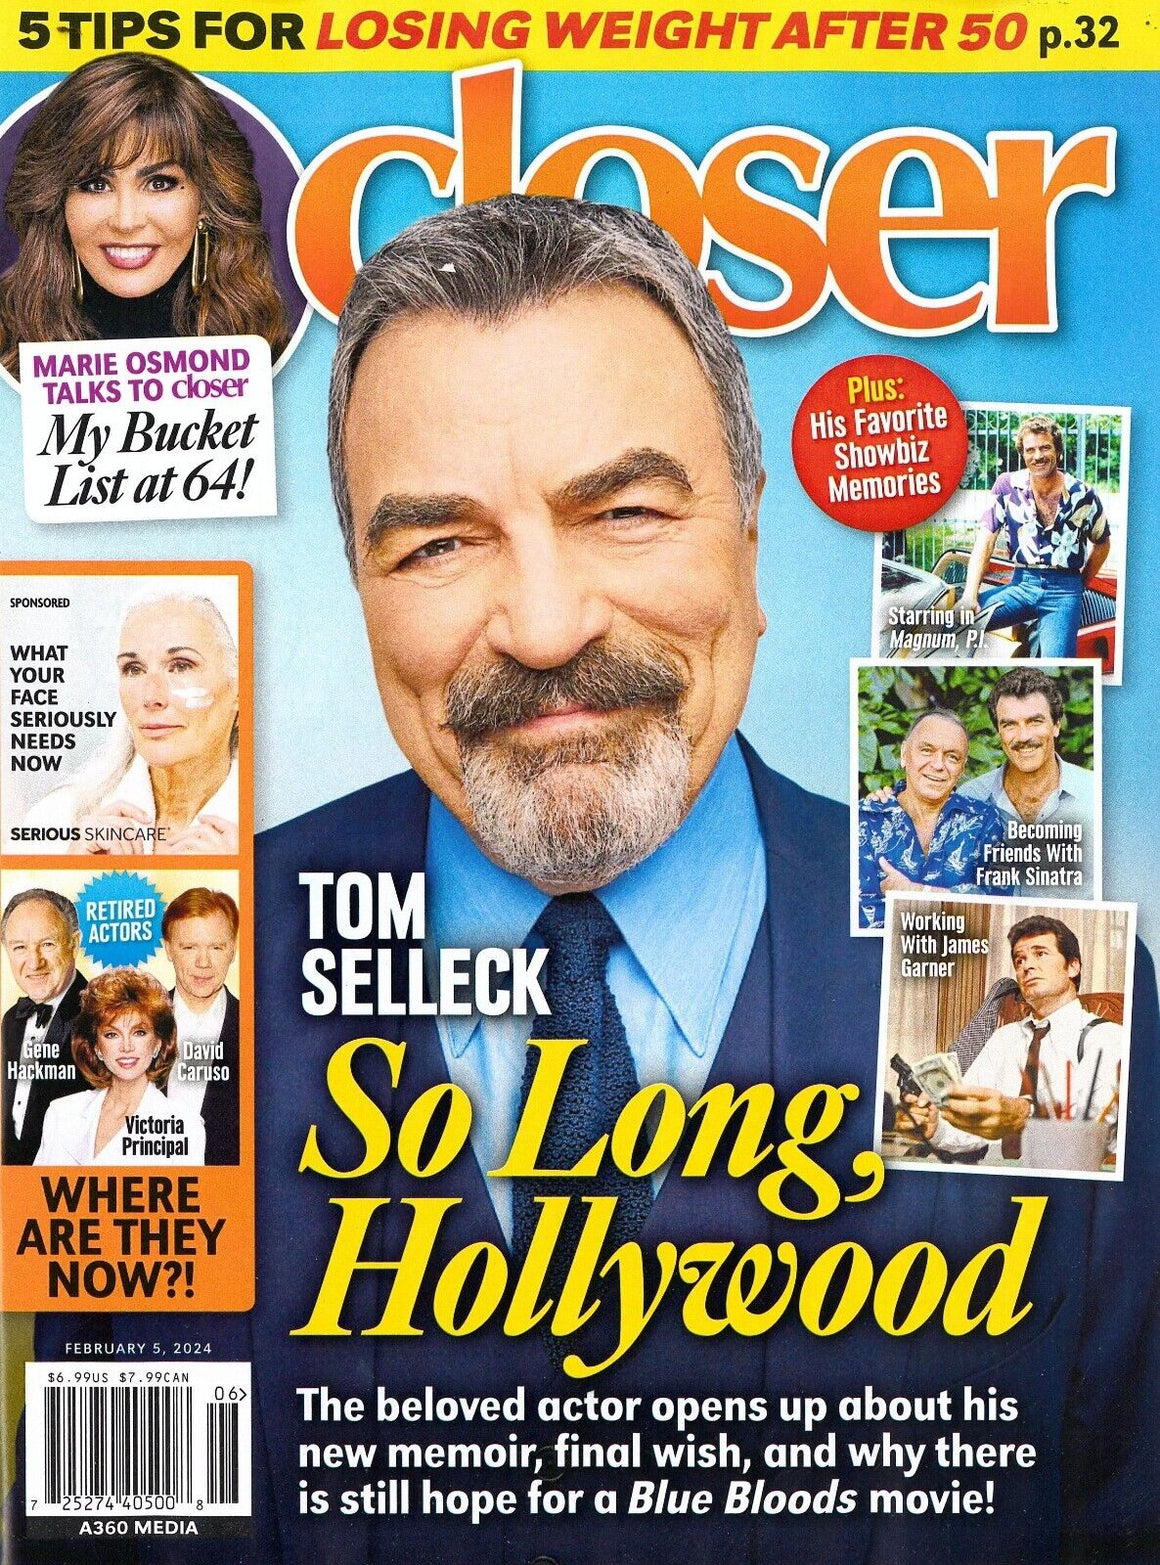 CLOSER MAGAZINE - FEBRUARY 5, 2024 - TOM SELLECK (Cover) SO LONG HOLLYWOOD